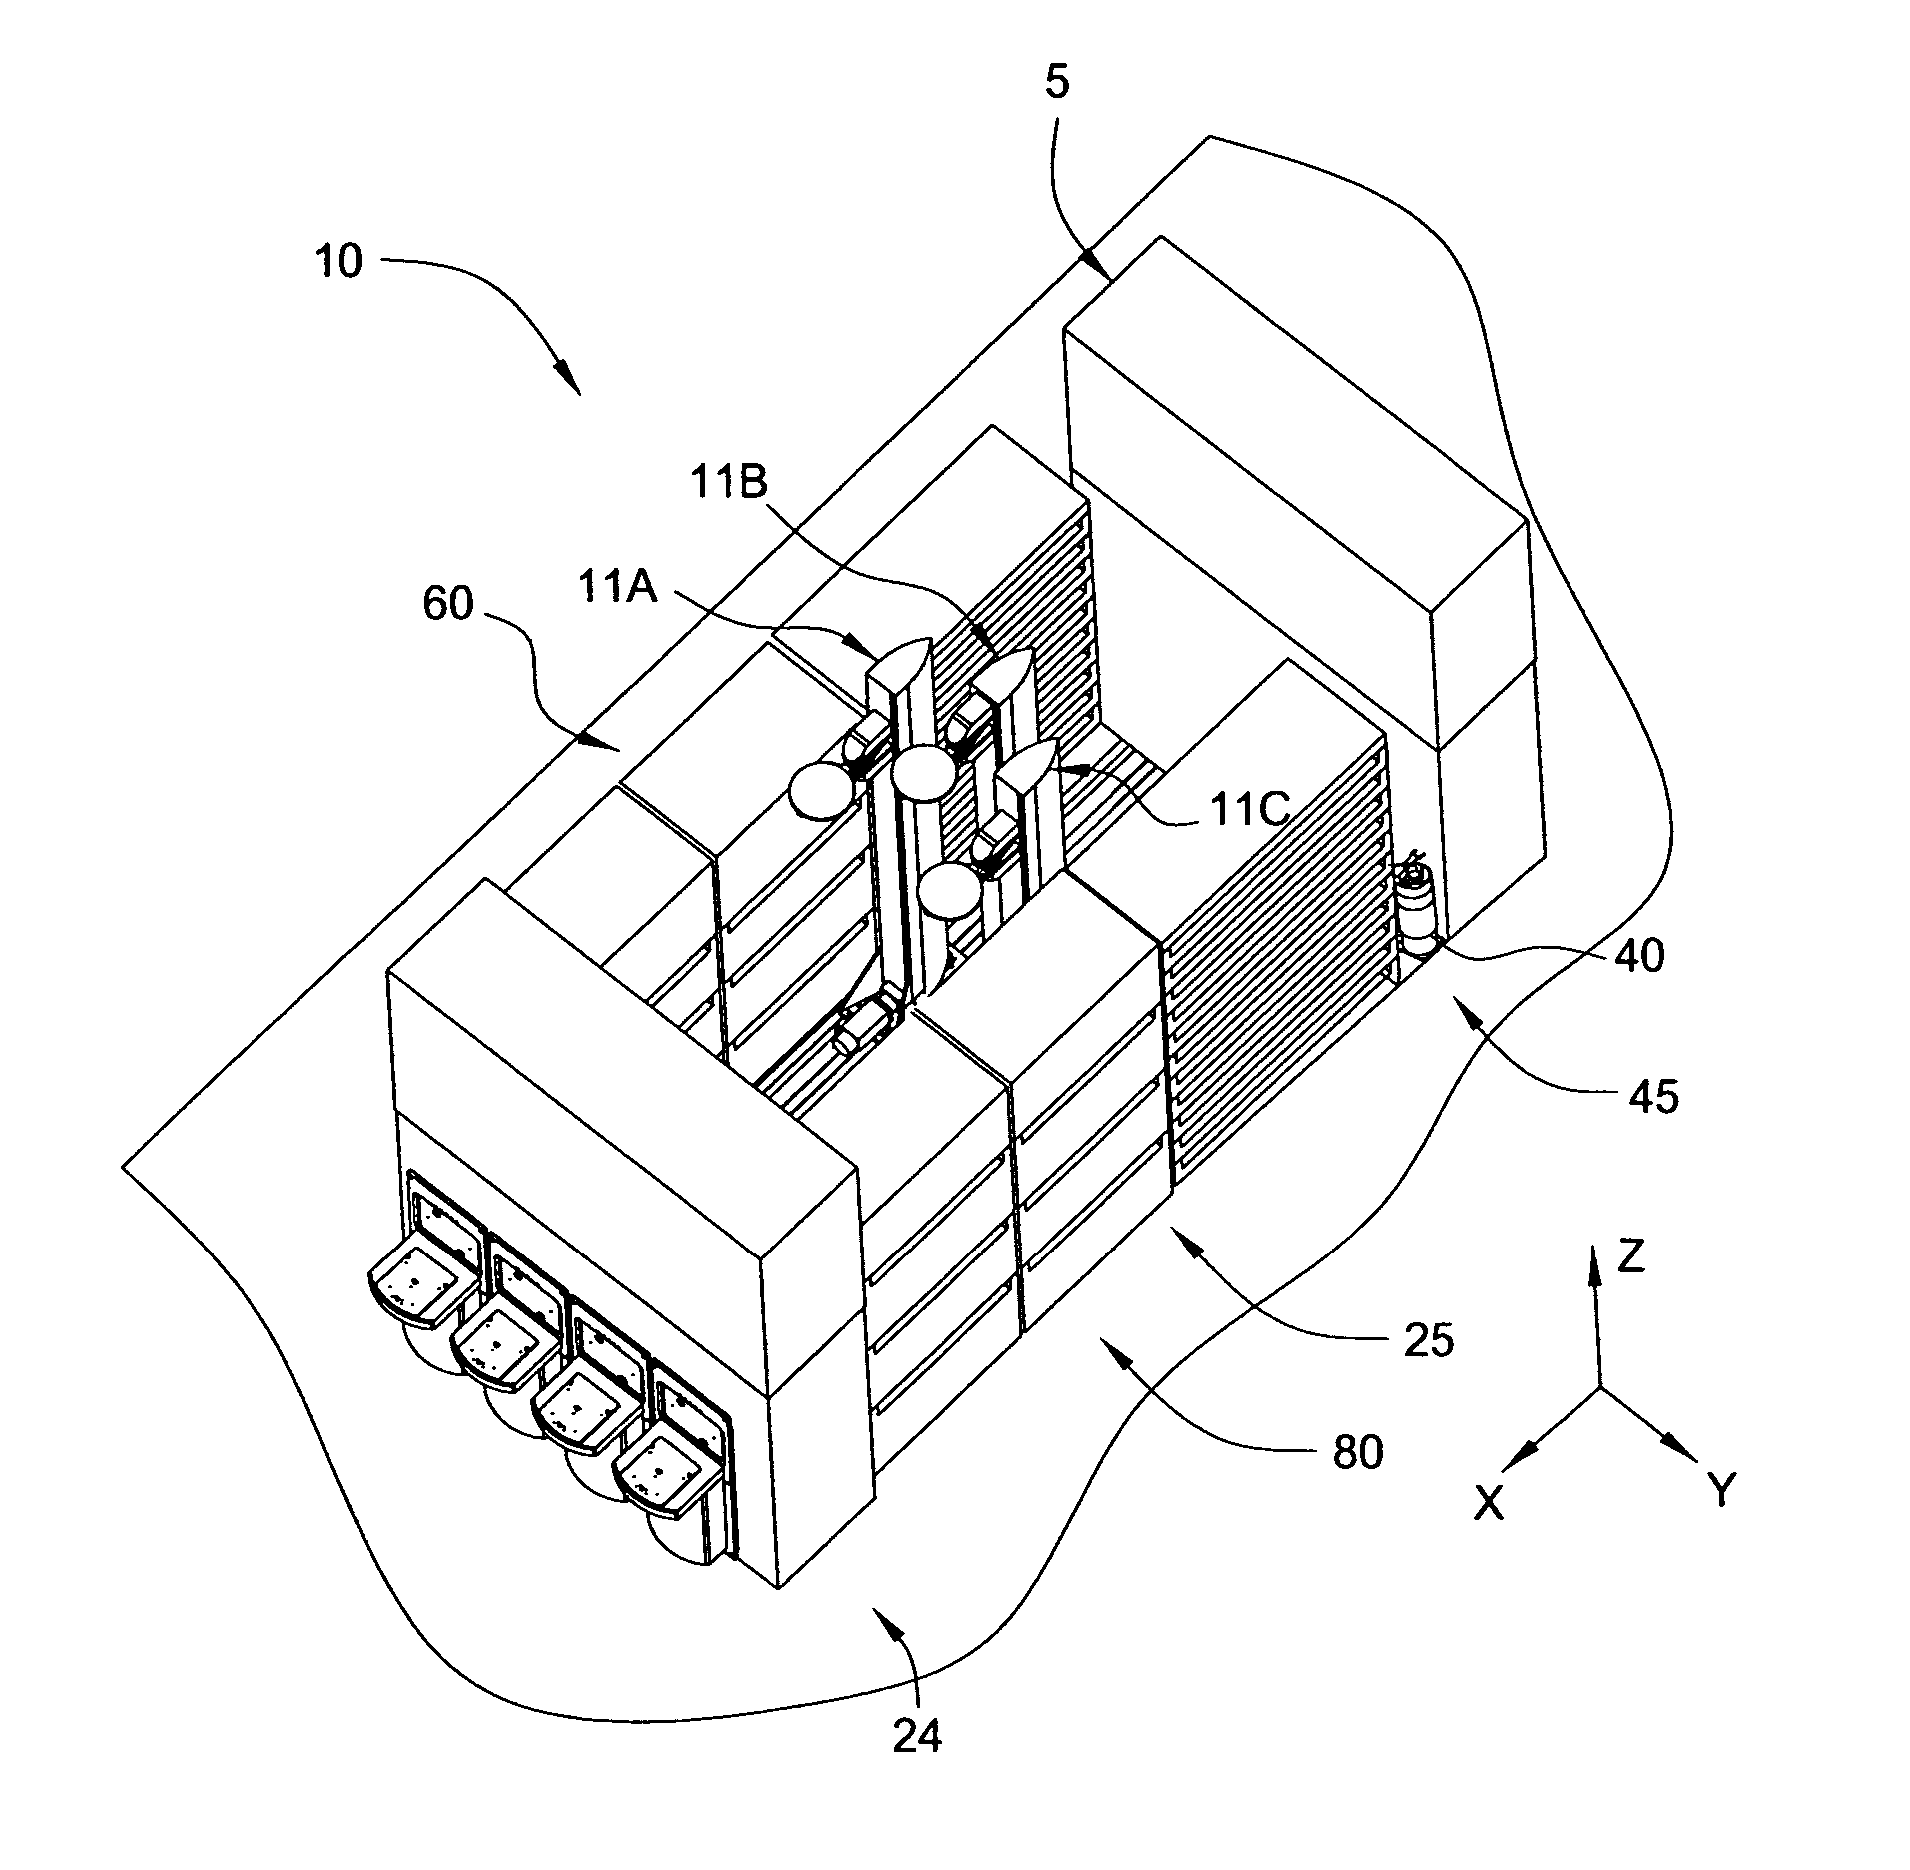 Substrate gripper for a substrate handling robot